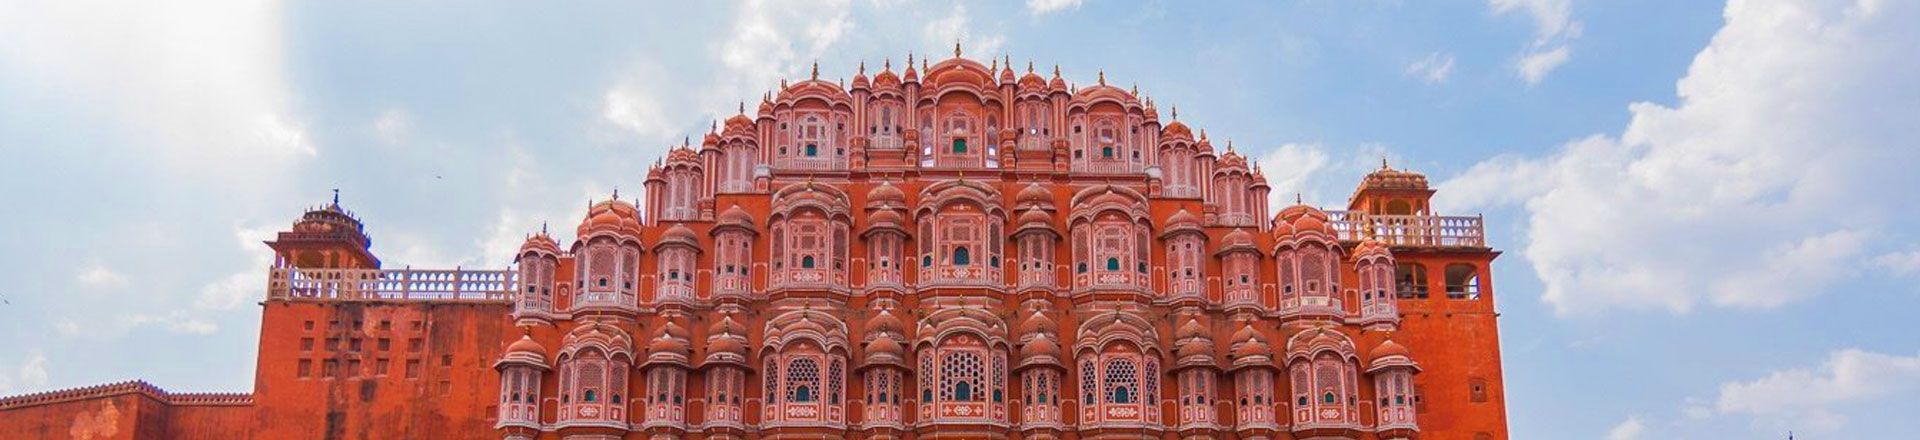 4 Days 3 Nights Golden Triangle Tour Packages